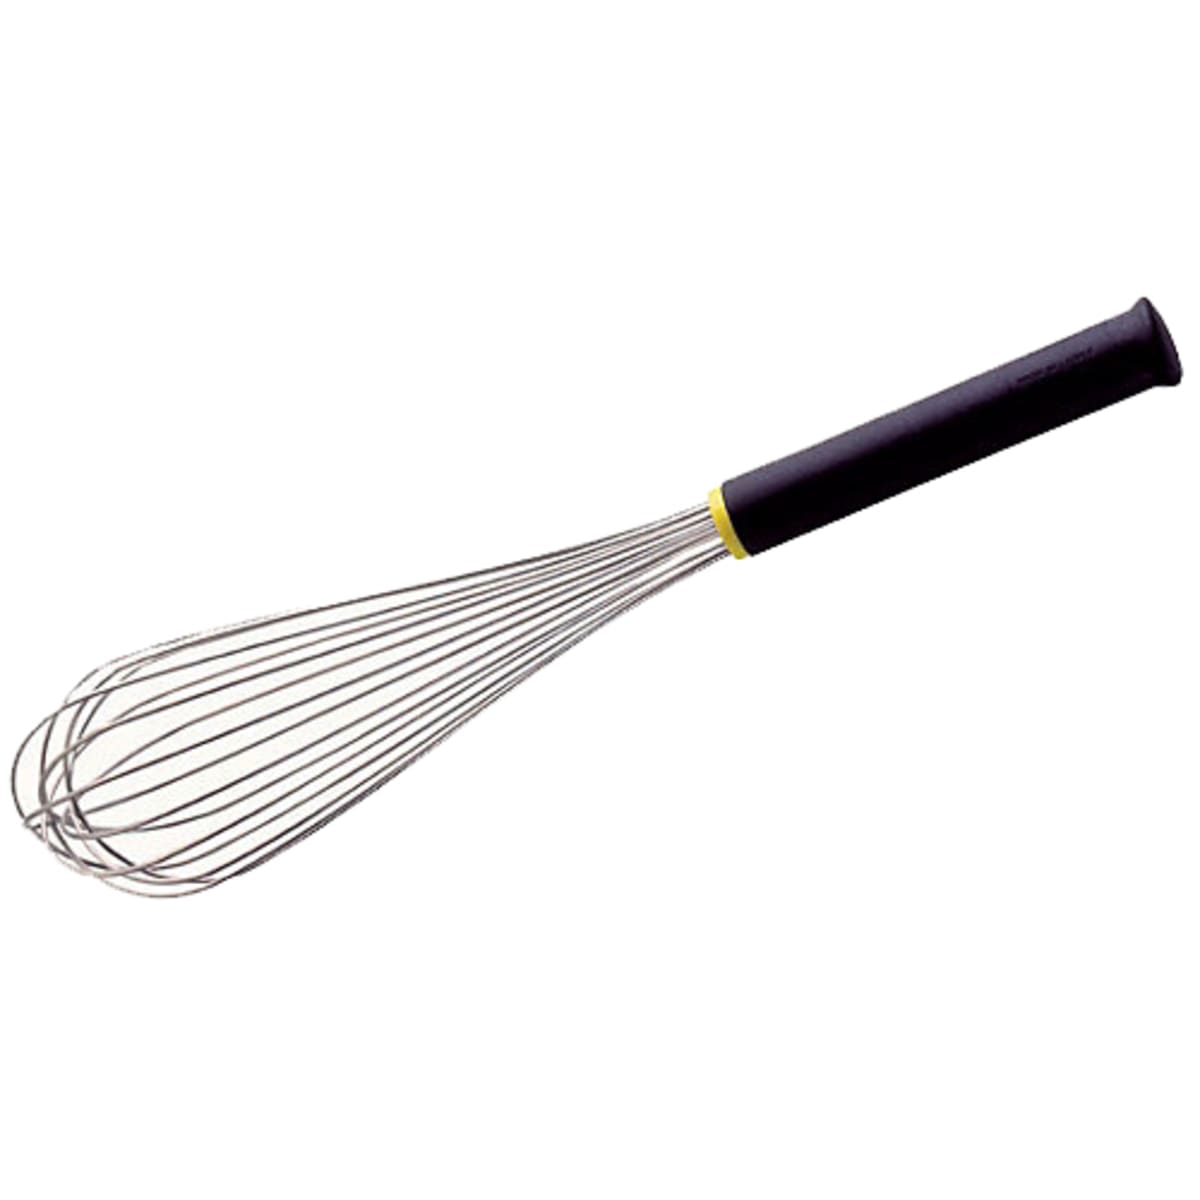 comal, 15.5 carbon steel - Whisk